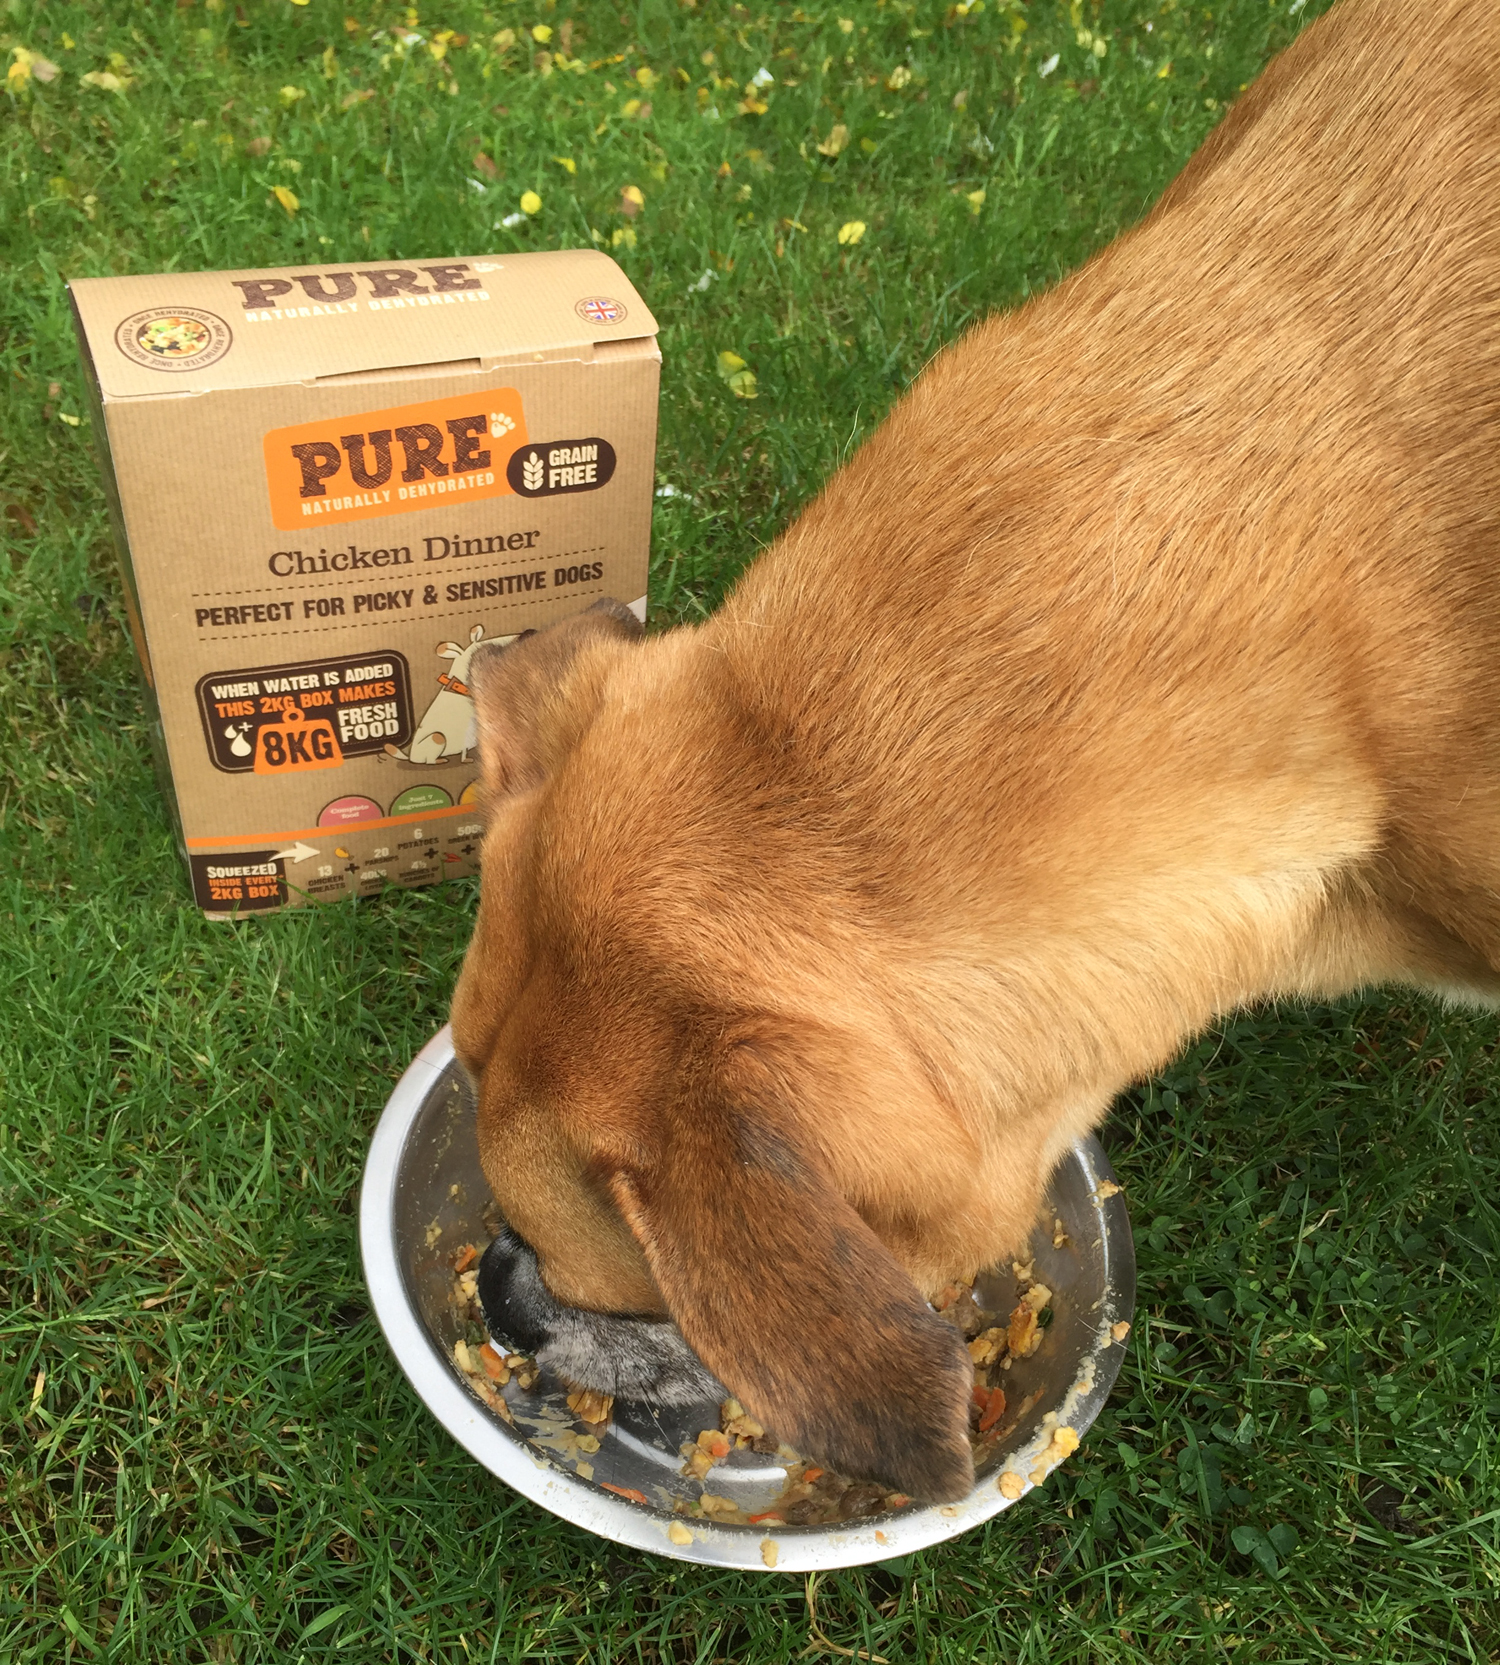 Pure chicken dinner dog food review